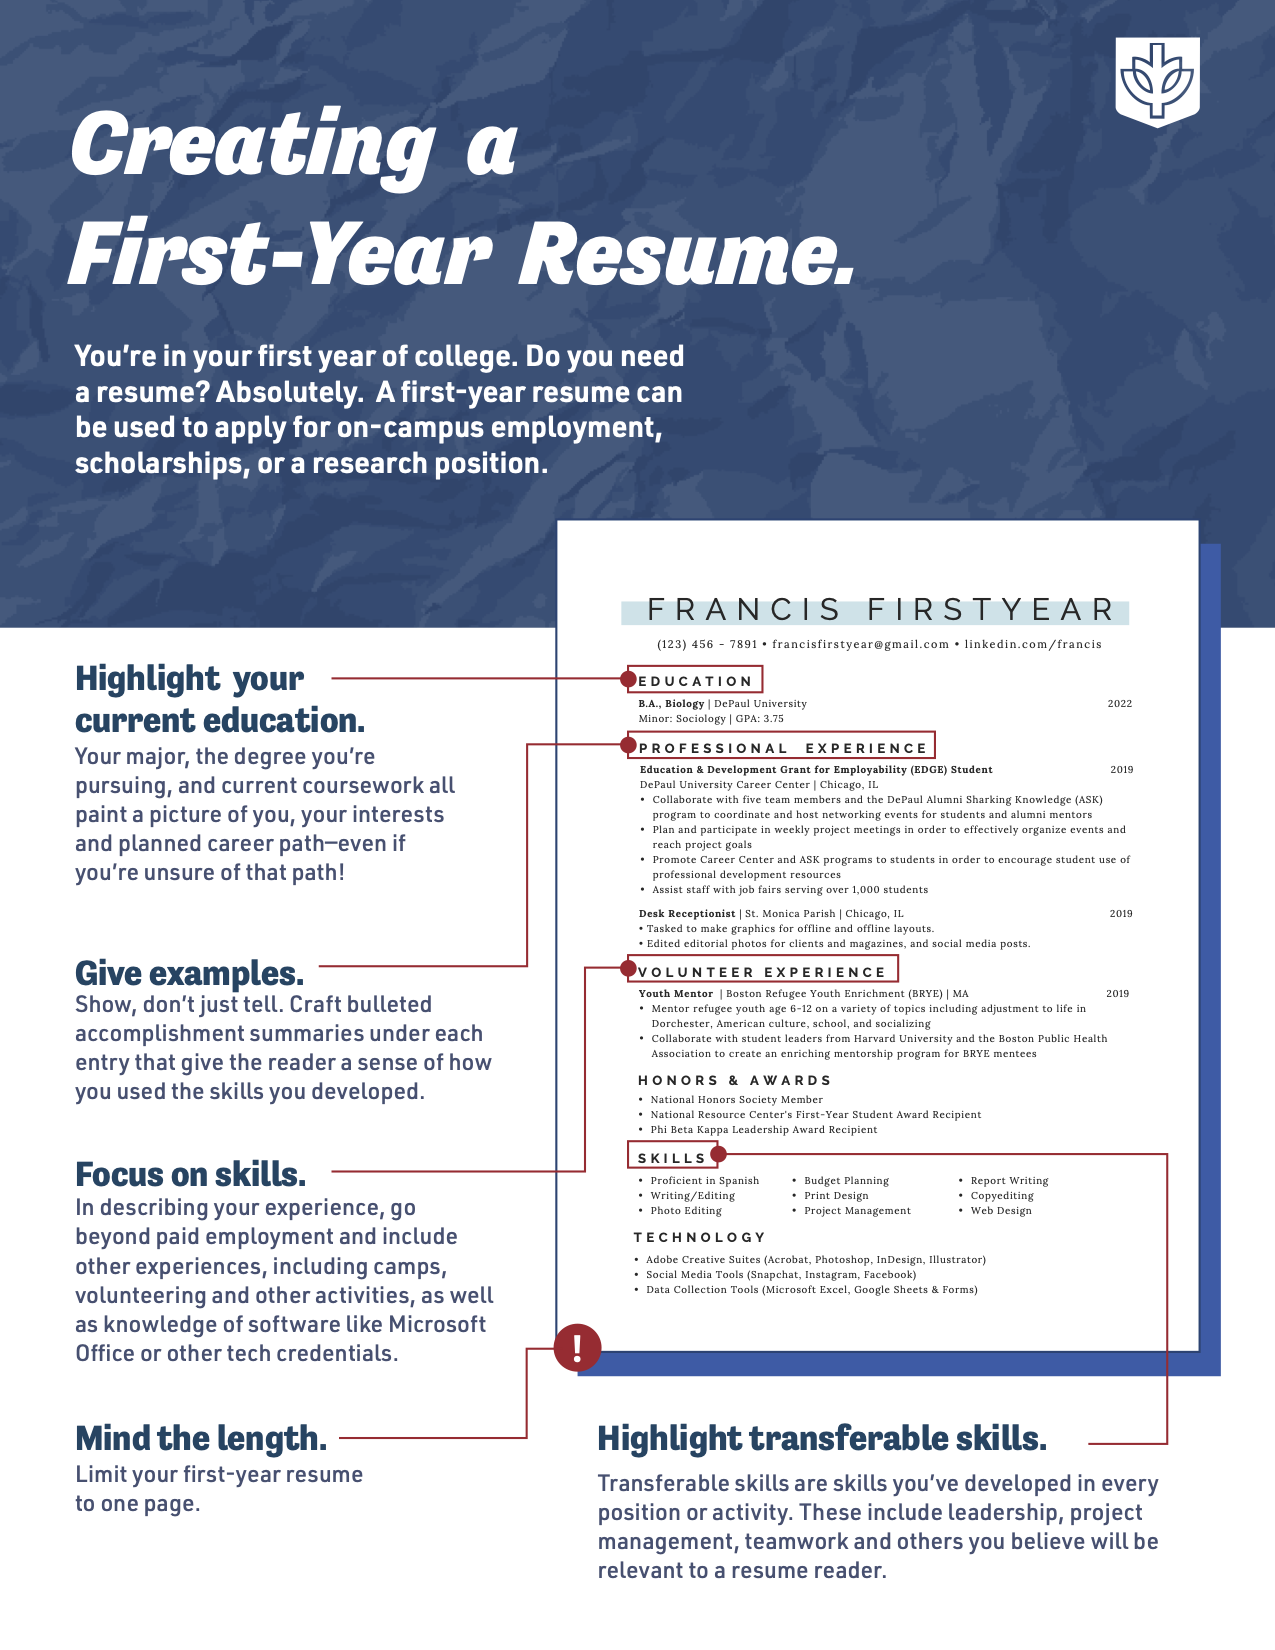 First-Year Resume